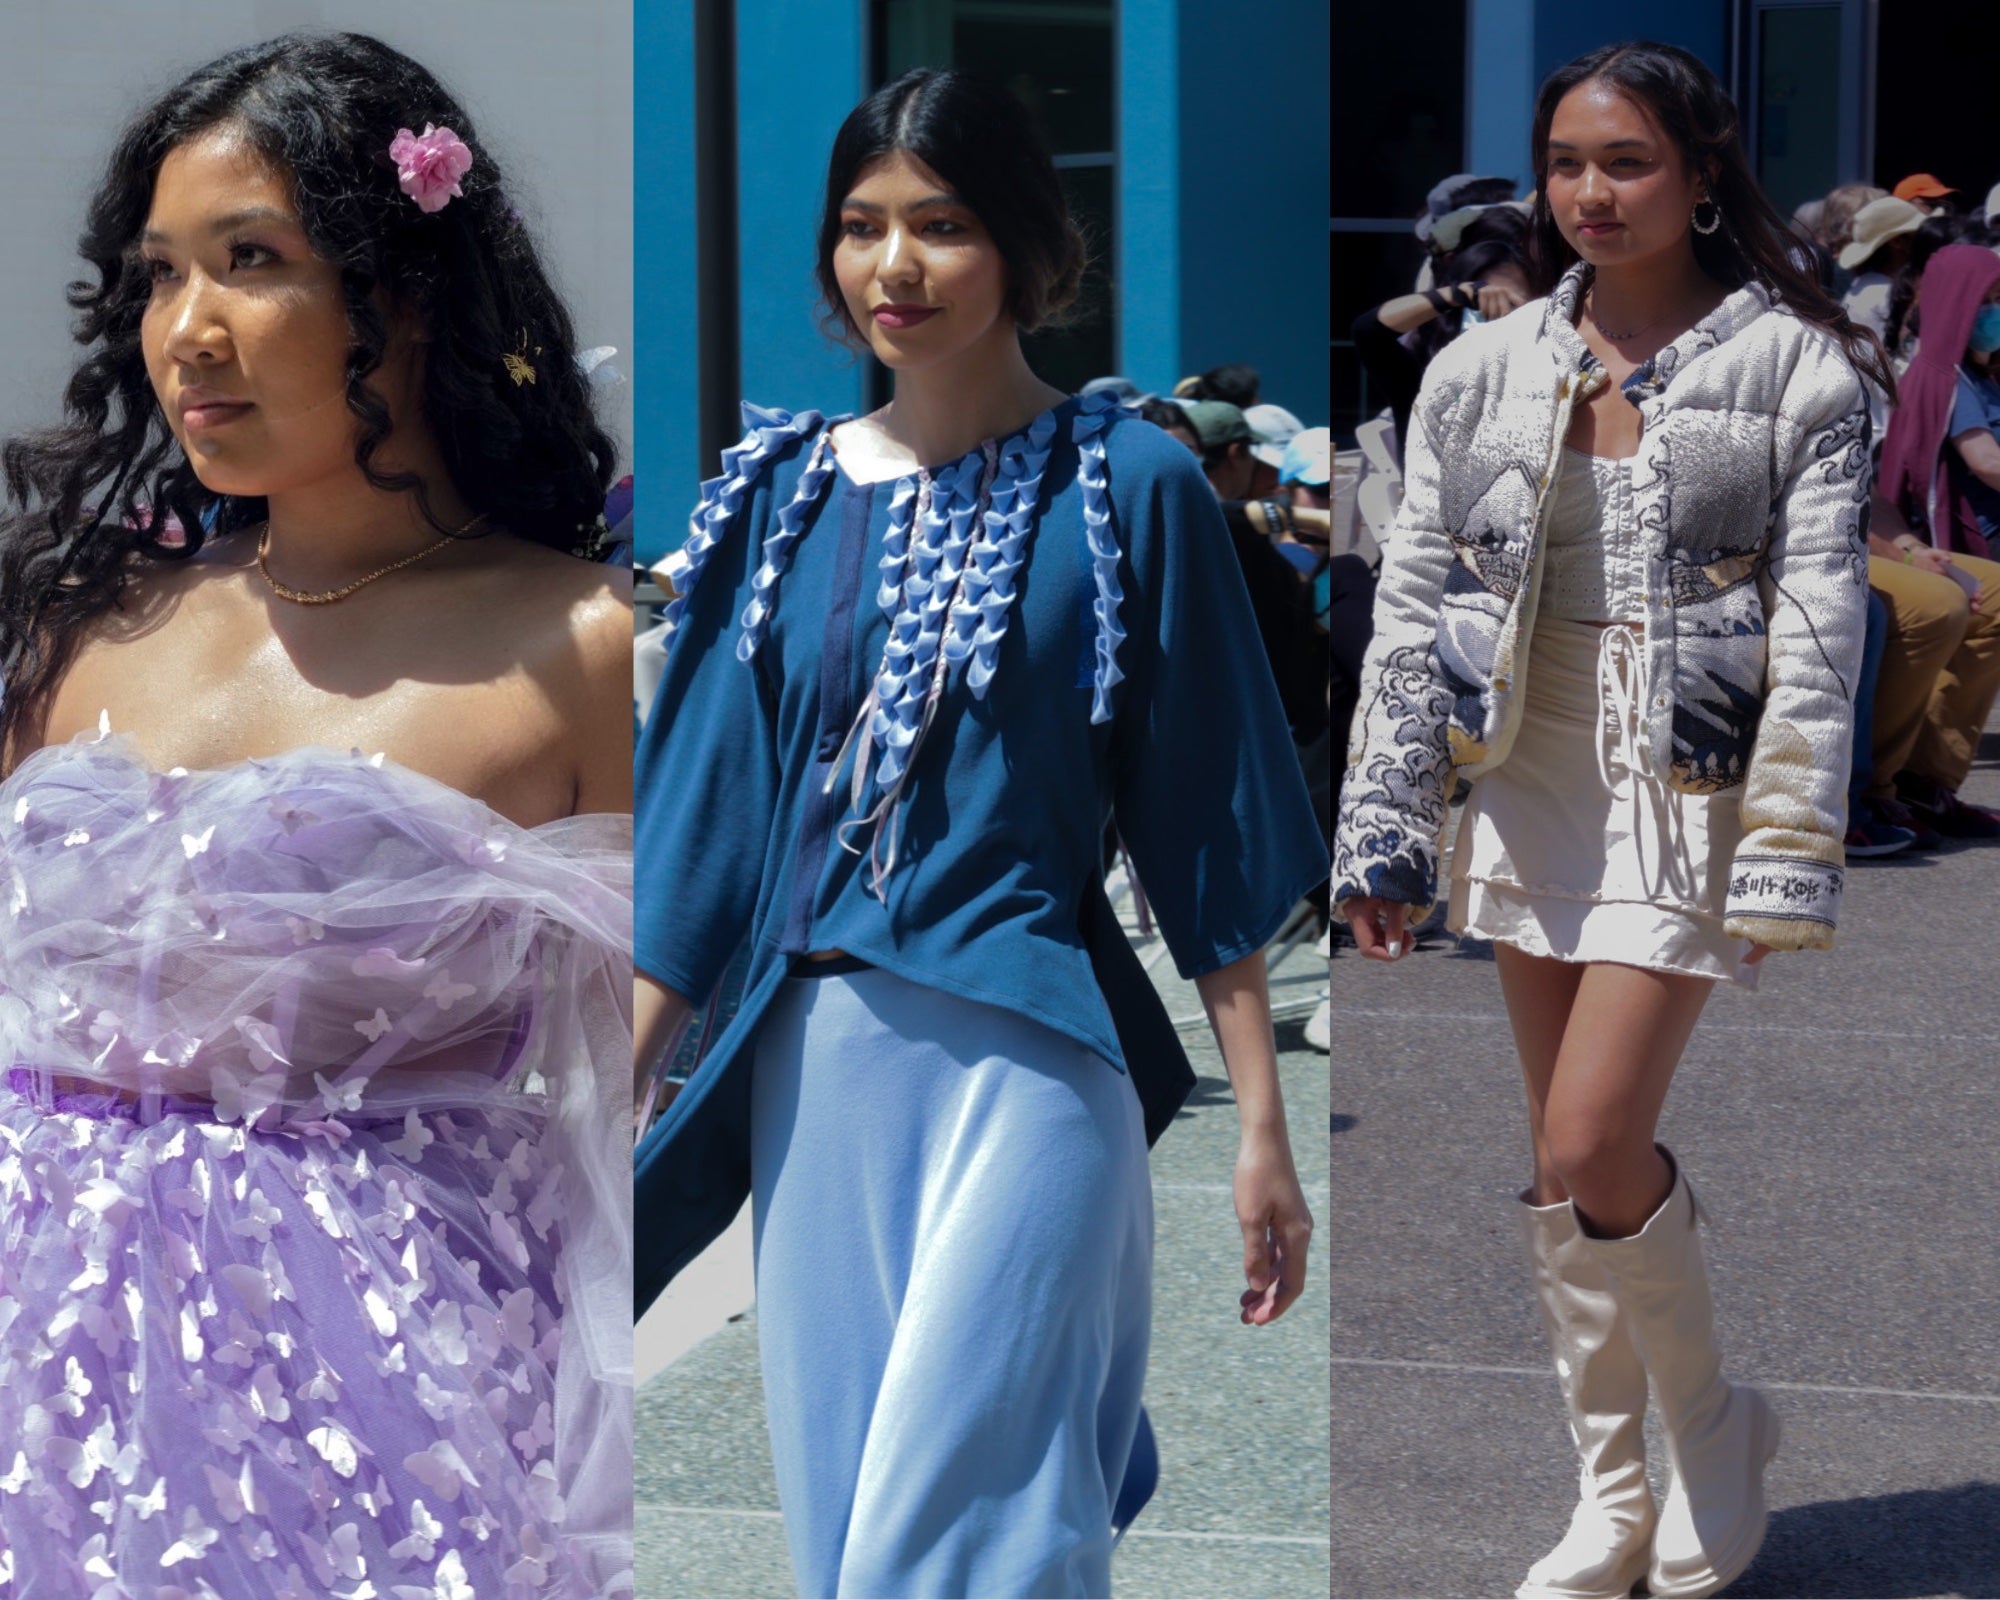 triptych of three photos of students exhibiting fashions at UC Davis fashion show